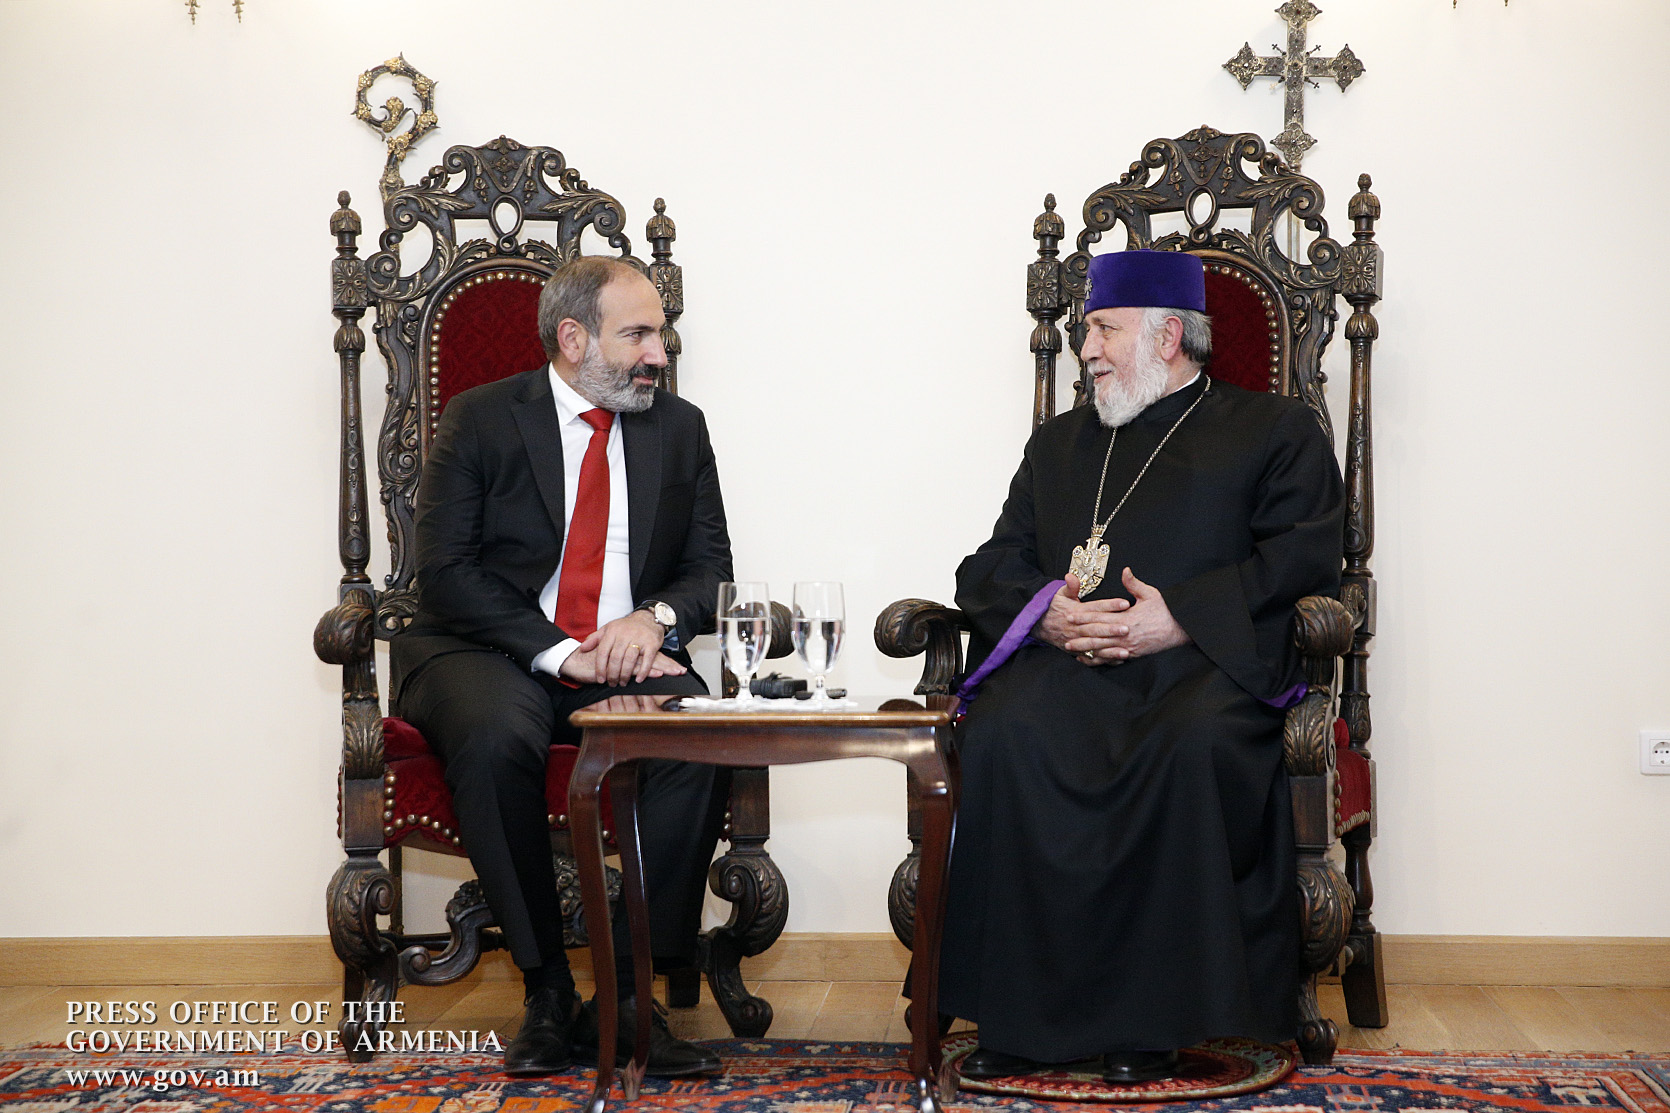 ‘The Holy Armenian Apostolic Church emerged as one of our people’s most important institutions; it is one of the pillars of our national consciousness‘